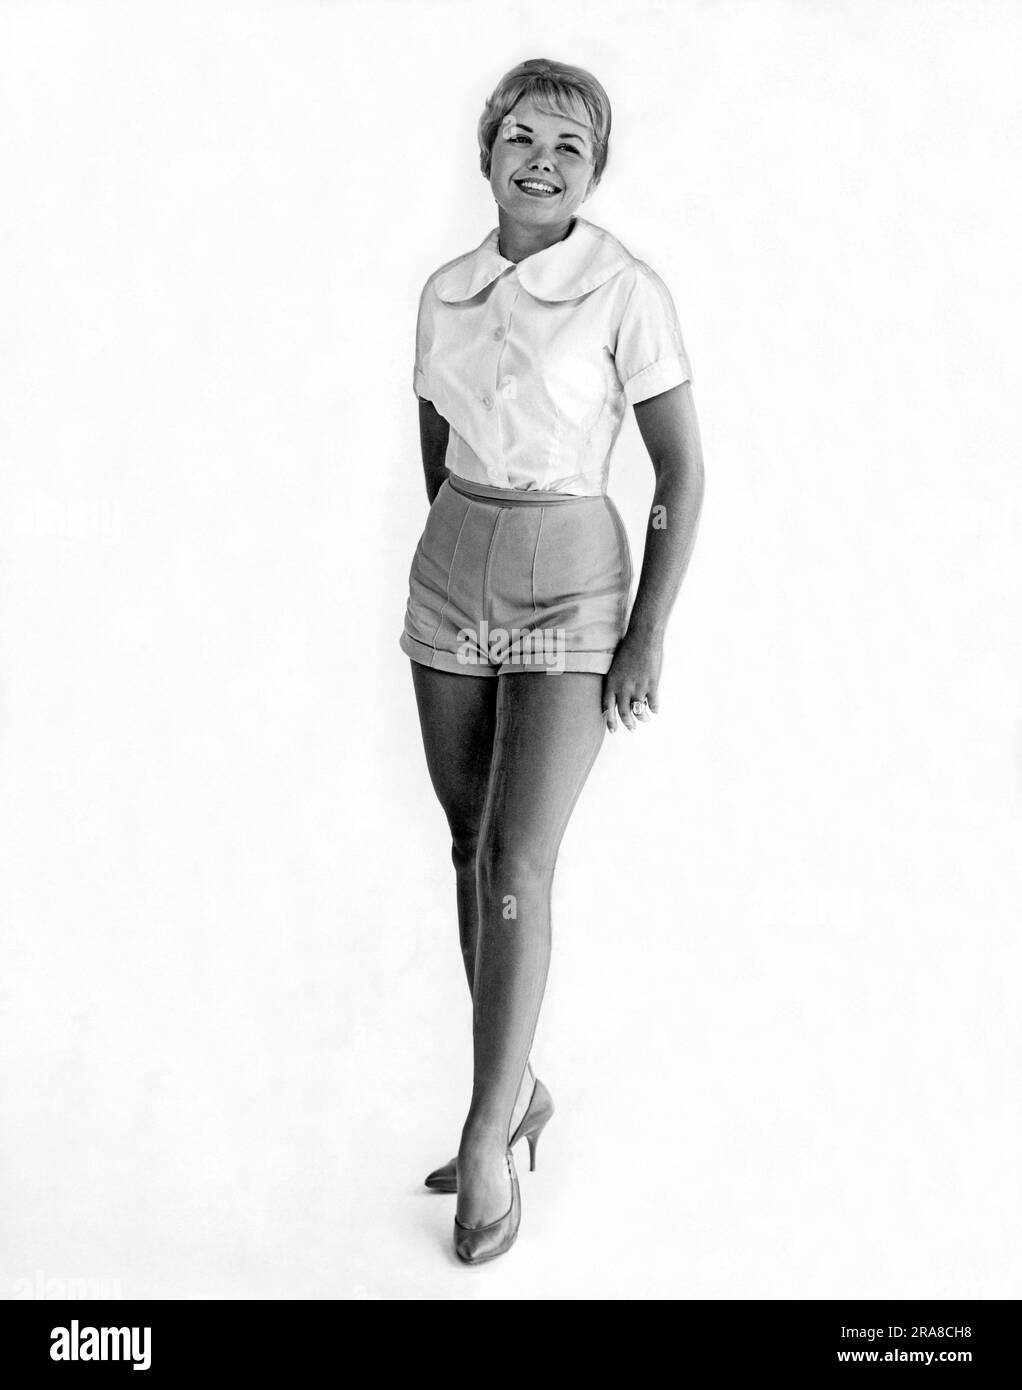 Woman wearing short shorts Black and White Stock Photos & Images - Alamy